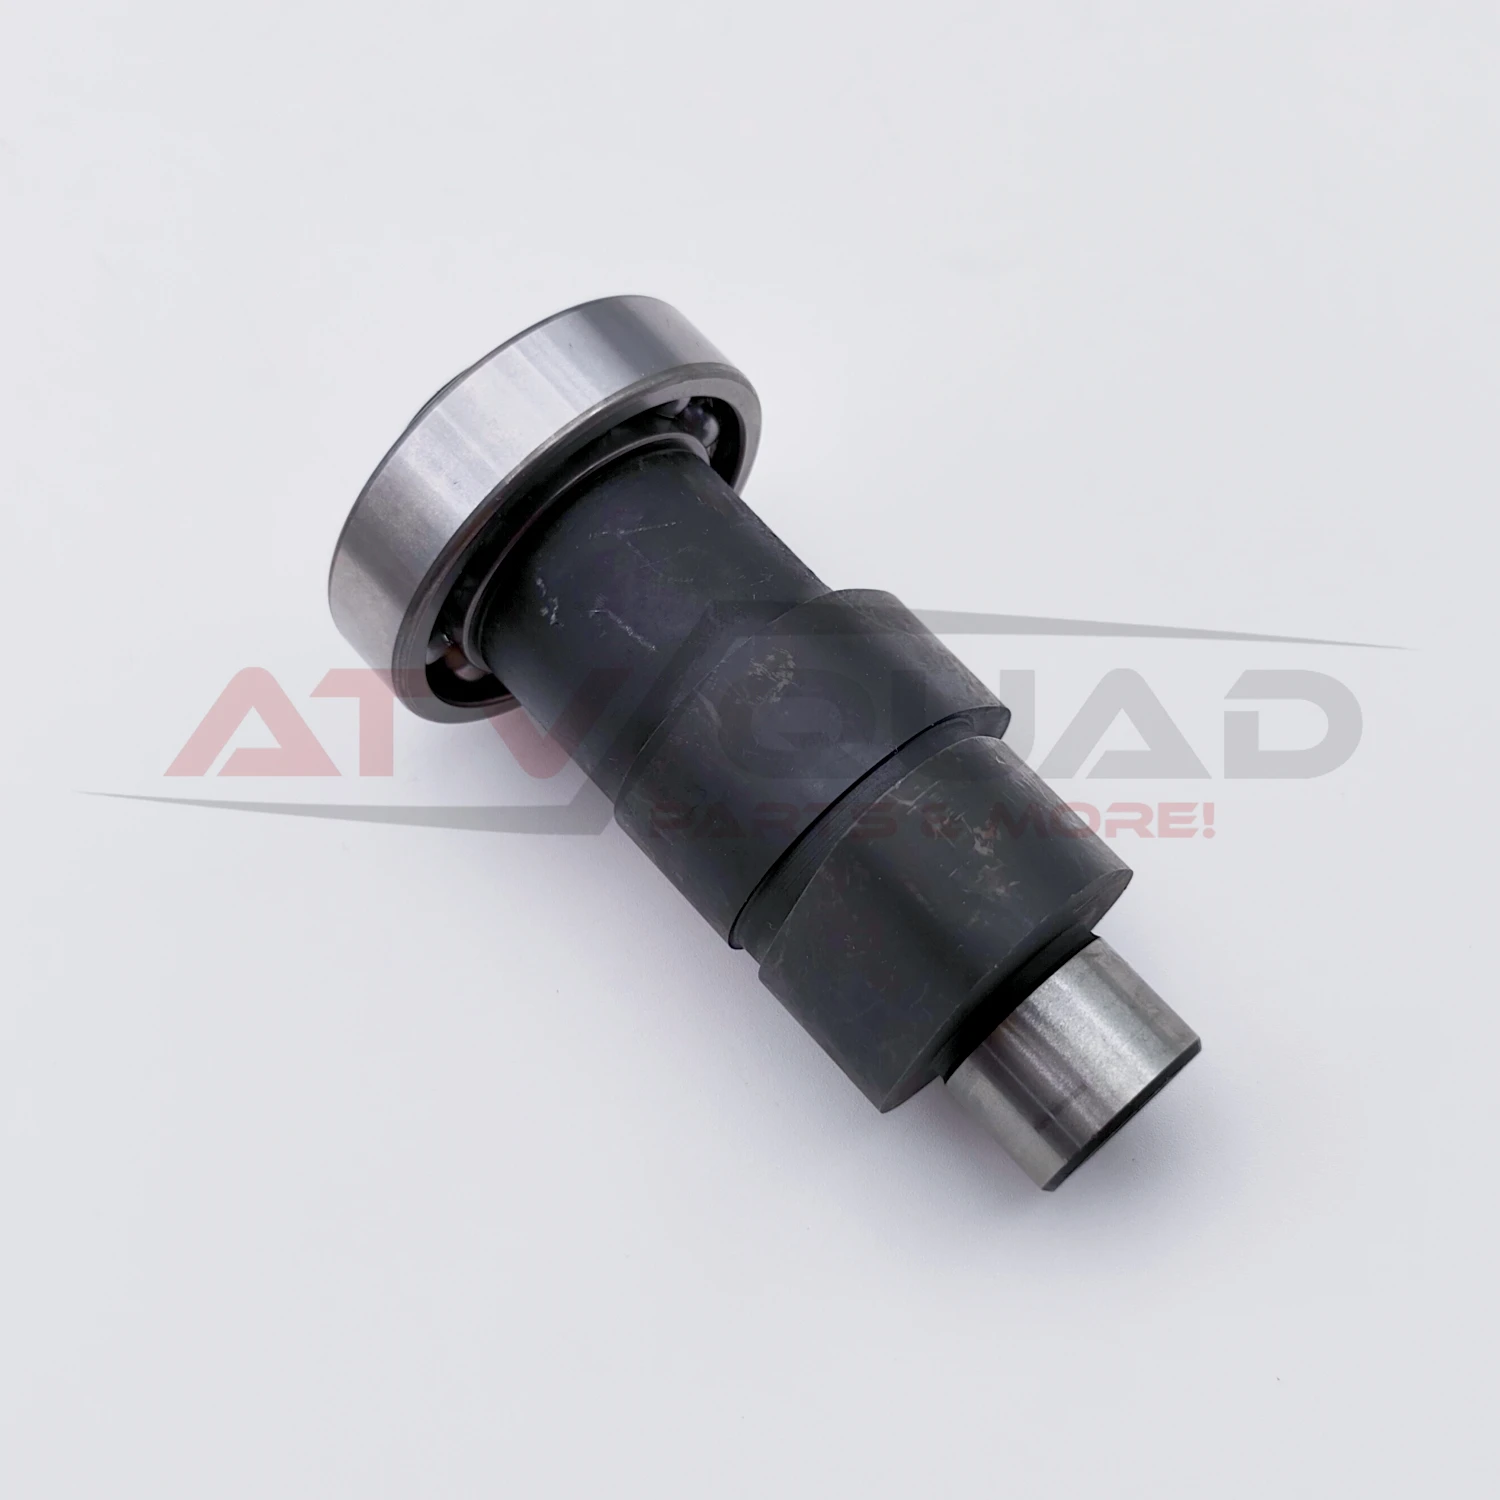 

Camshaft for Stels 400H Hisun Forge 400 Tactic 400 HS400 Massimo Knight 400 MSU 400 14100-002-0000 14100-F11-0000 LU013170